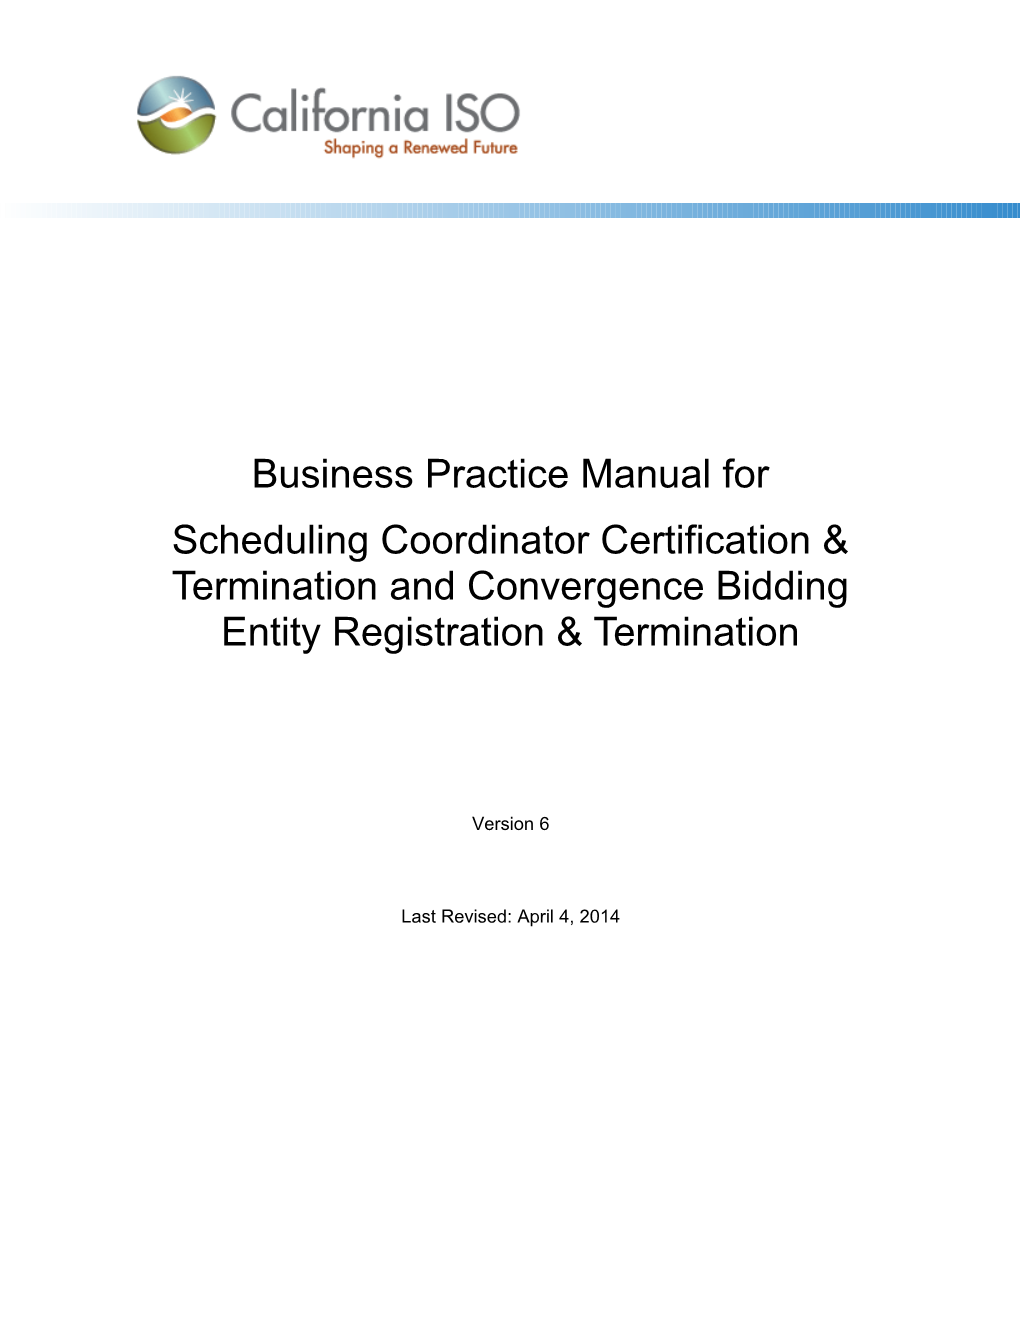 Business Practice Manual For